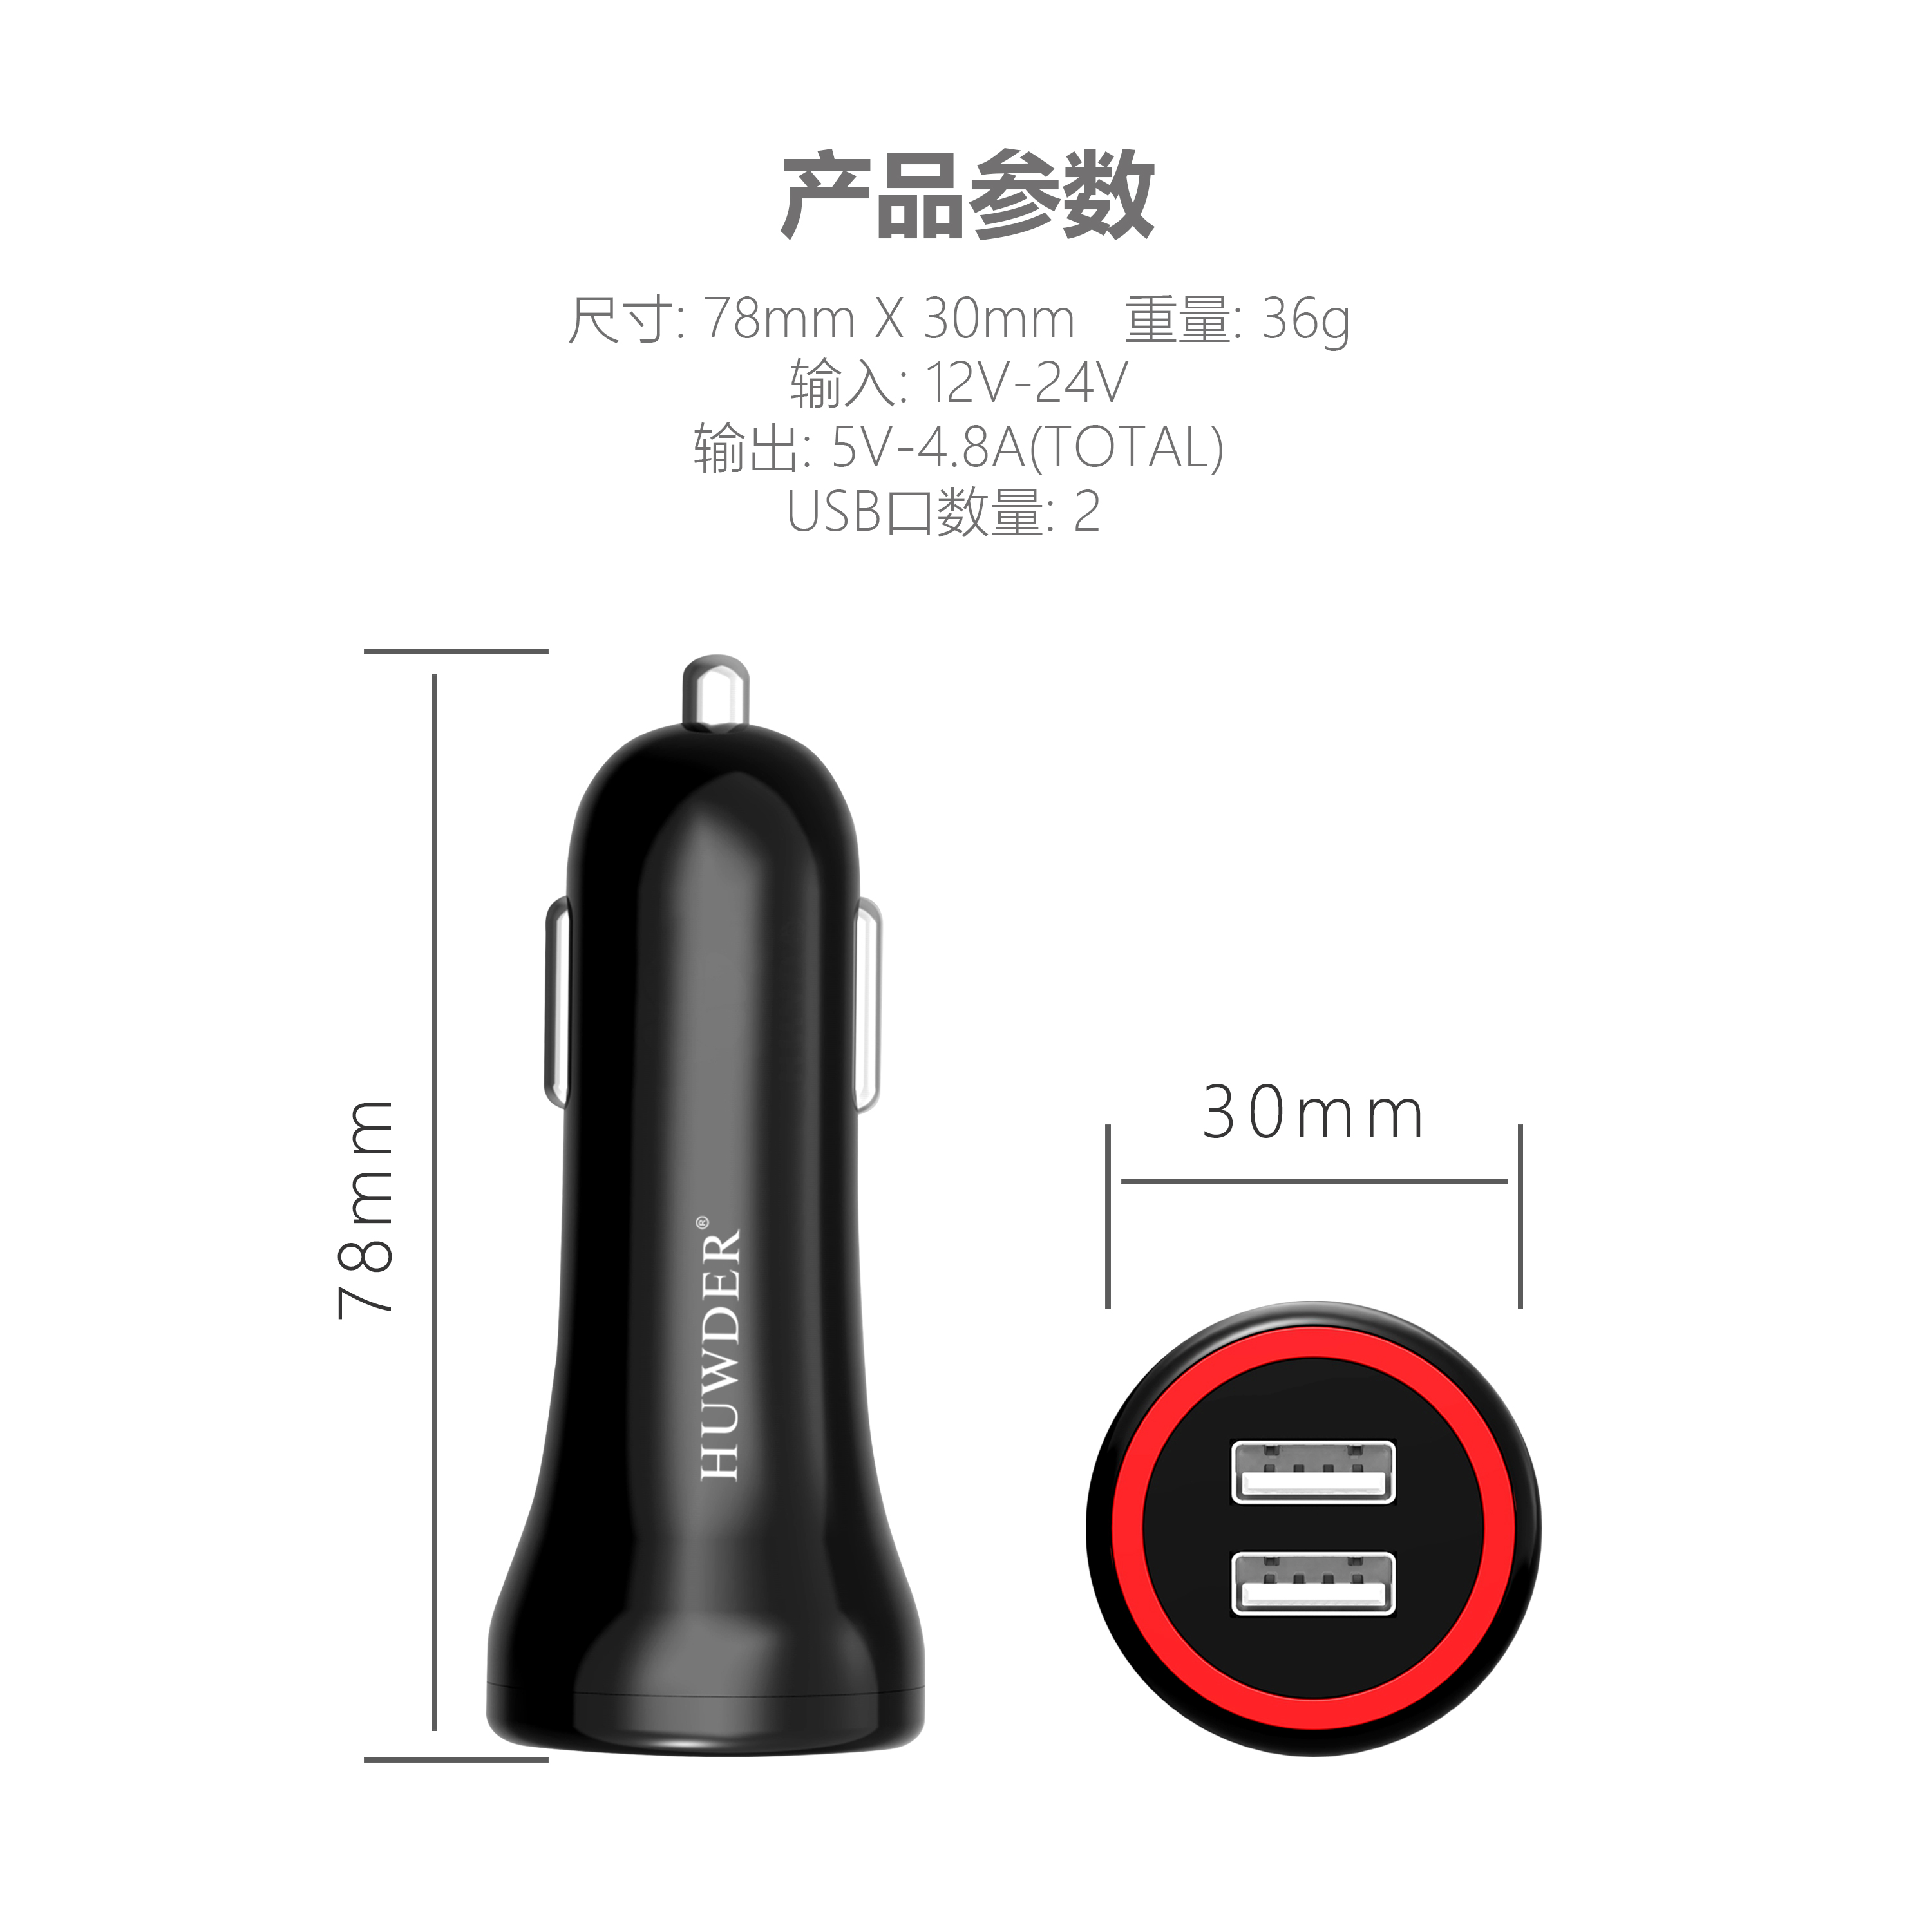 2 Sub-a Car Charger -HDD11-0224